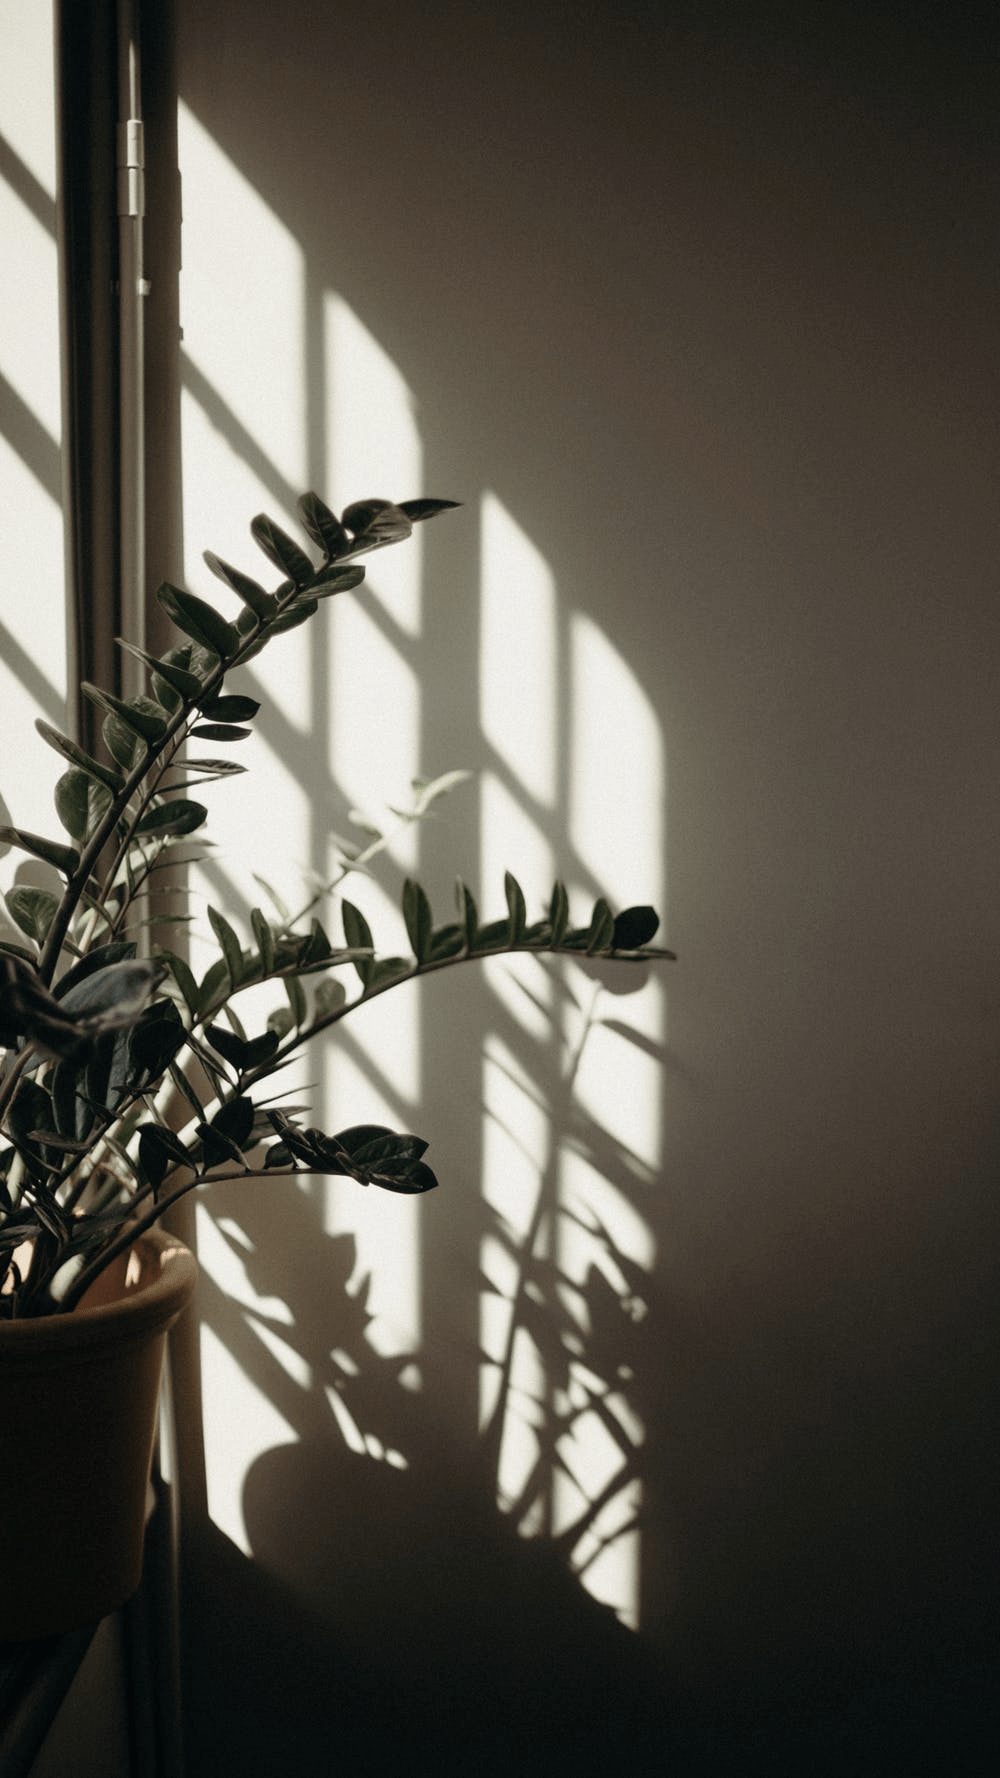 A plant sitting in the corner of room - Shadow, plants